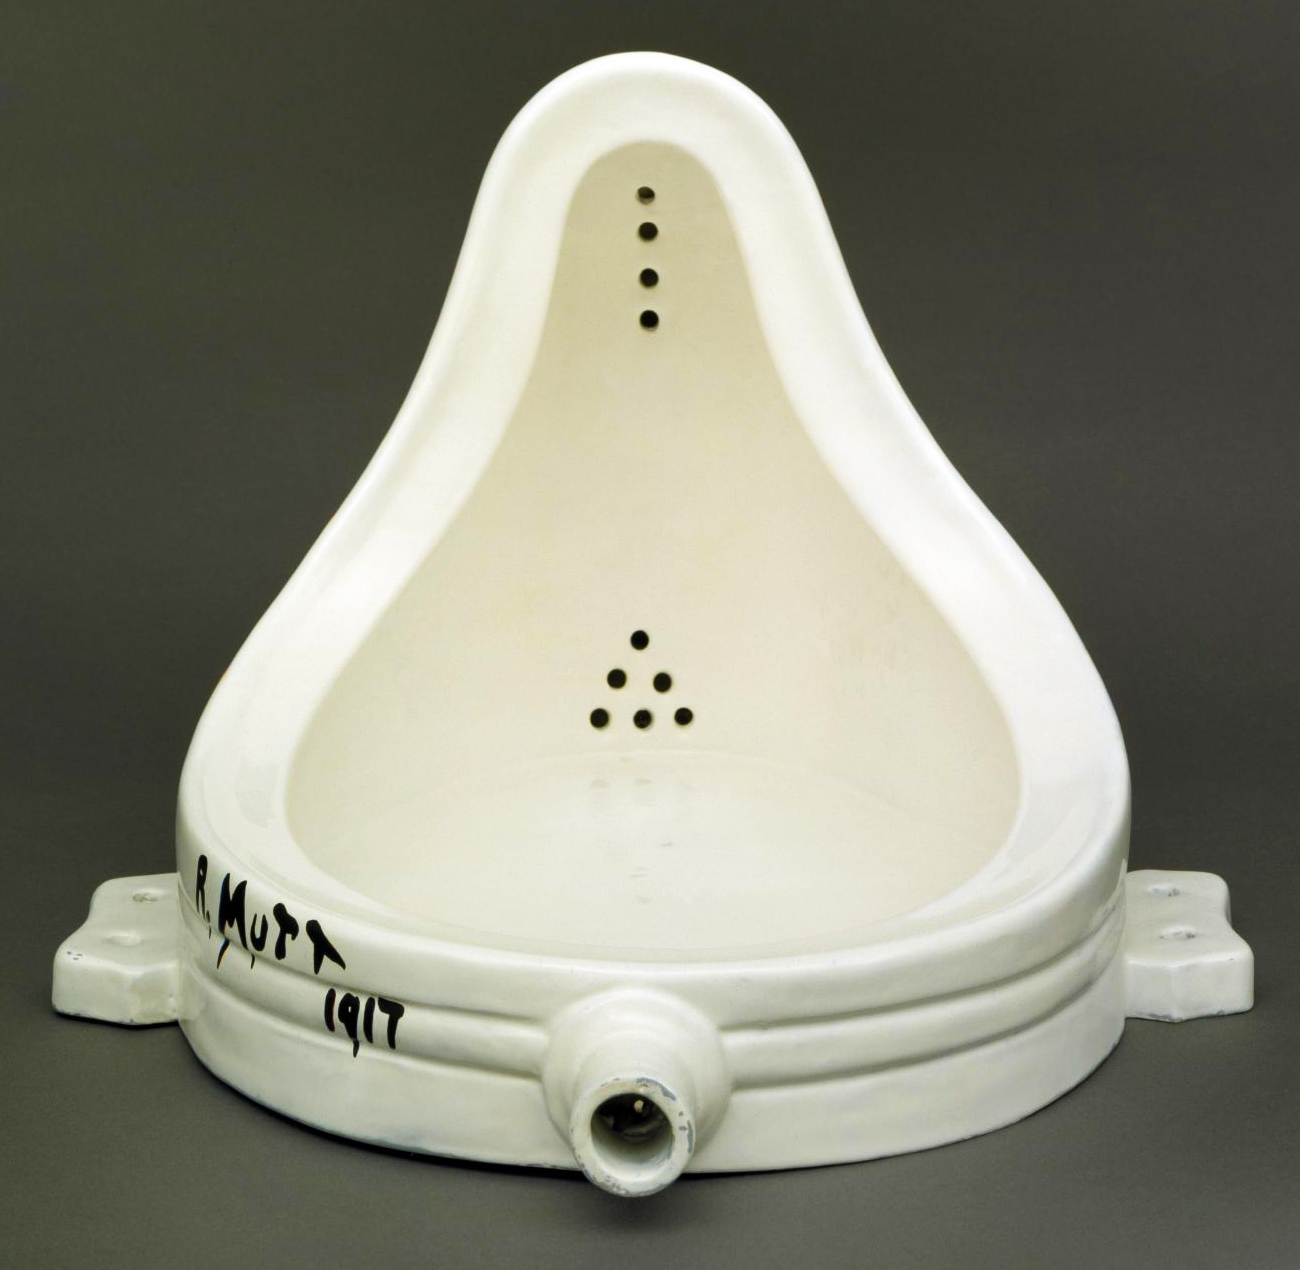 White porcelain urinal turned artwork, titled 'Fountain' by Marcel Duchamp. The urinal is signed 'R. Mutt 1917' in black paint on its side. The piece is positioned against a dark gray background and showcases its curvilinear form and drain holes.